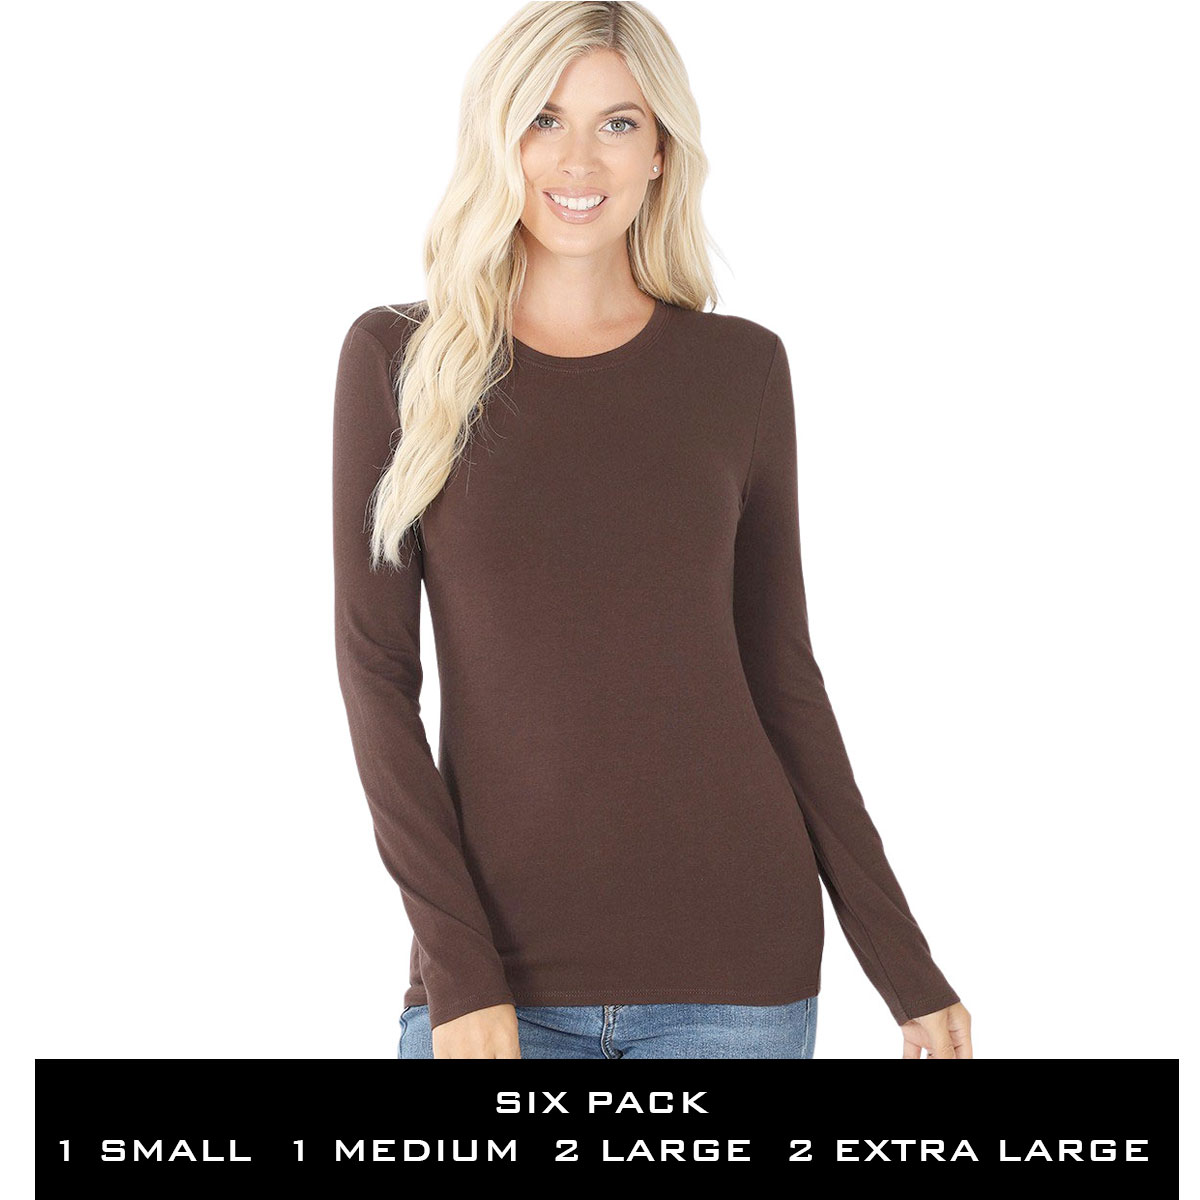  BROWN (SIX PACK) Cotton Long Sleeve Round Neck 3320 (1S/ 1M/ 2L/ 2XL)